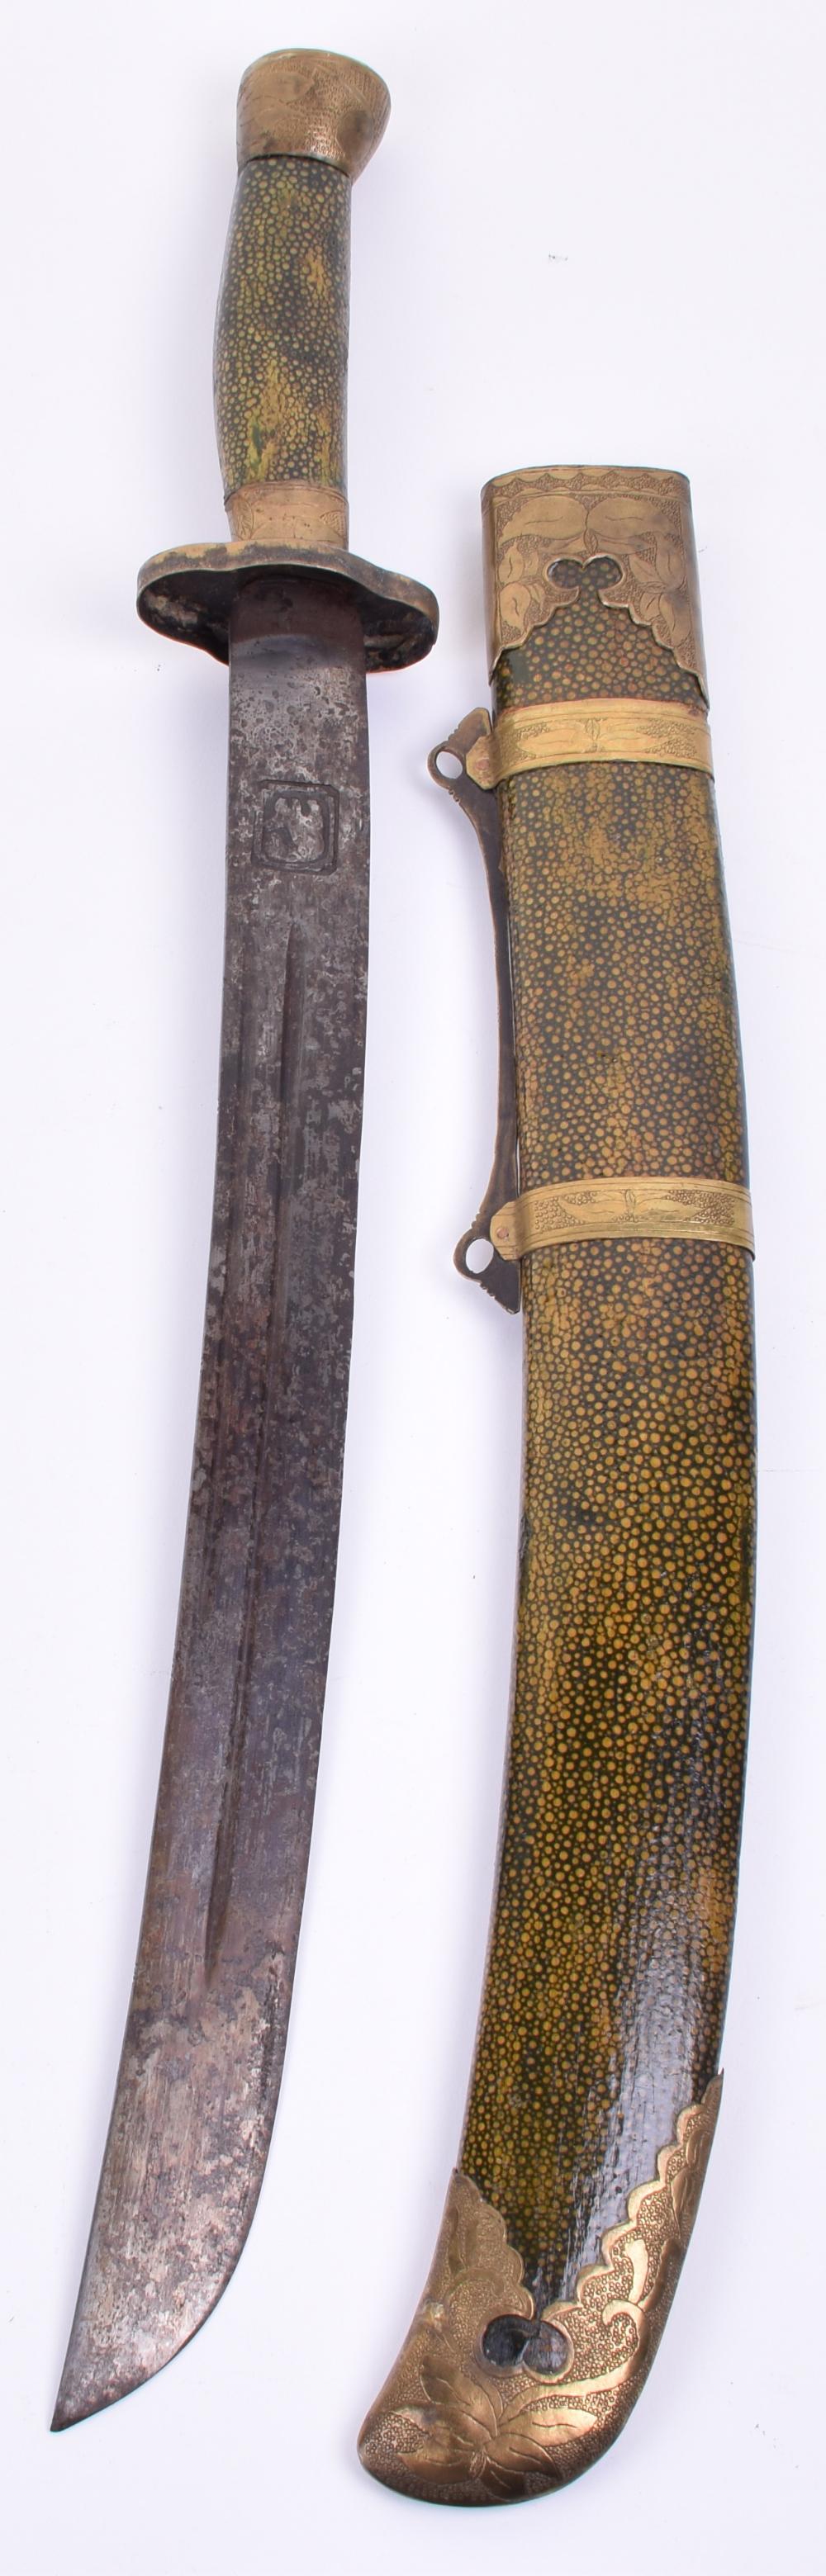 Chinese Qing Dynasty Dao Sword - Image 3 of 10